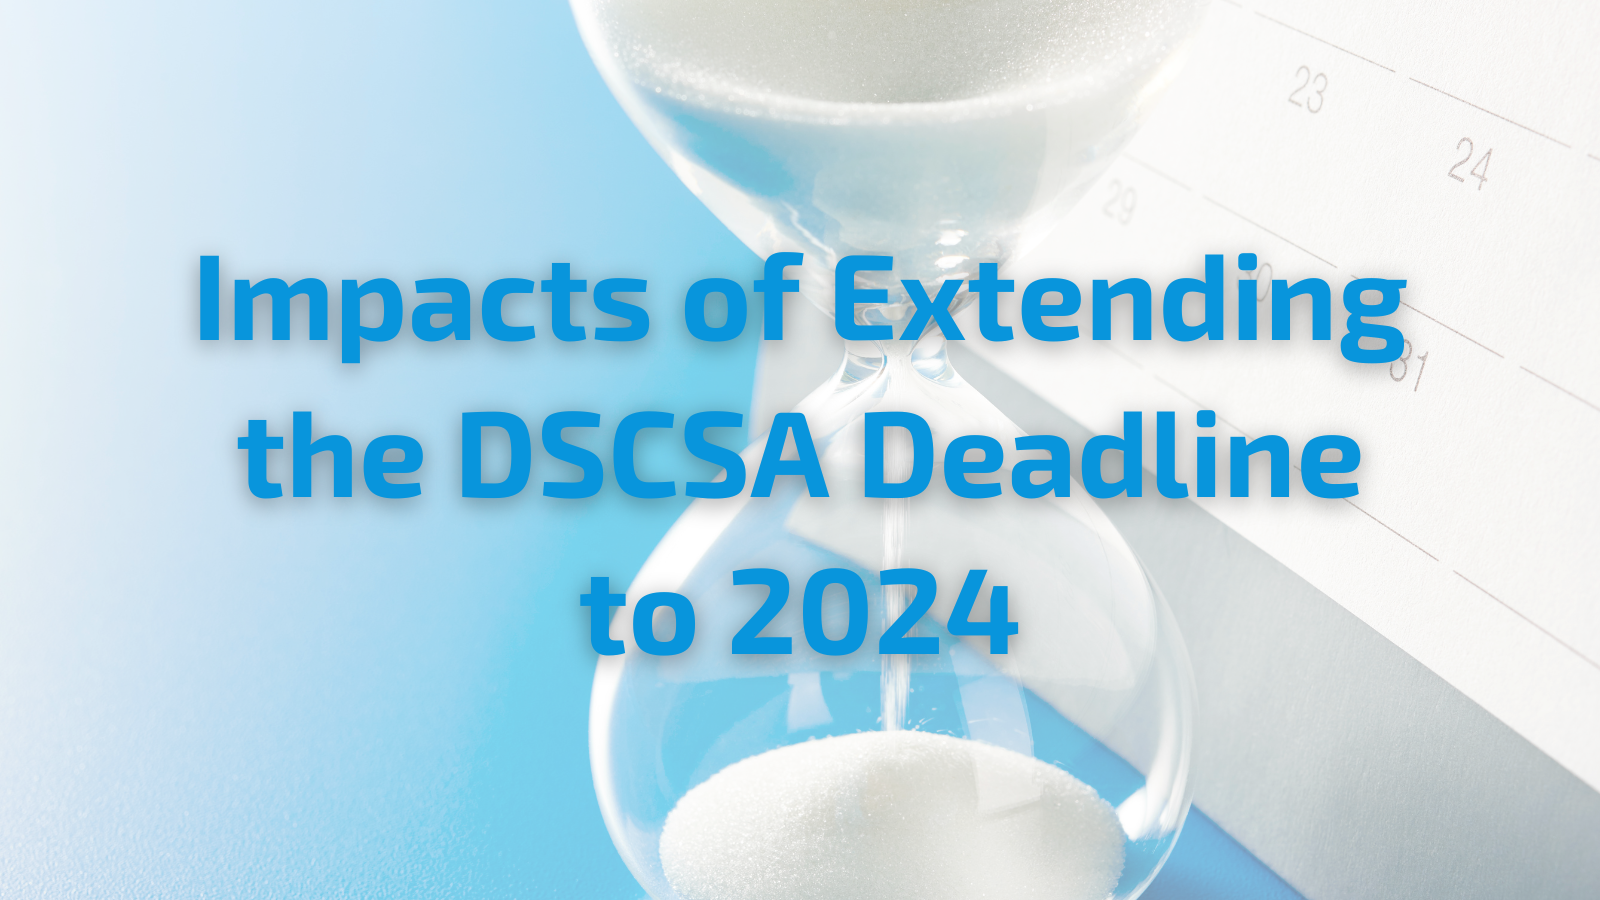 Impacts of Extending the DSCSA Deadline to 2024